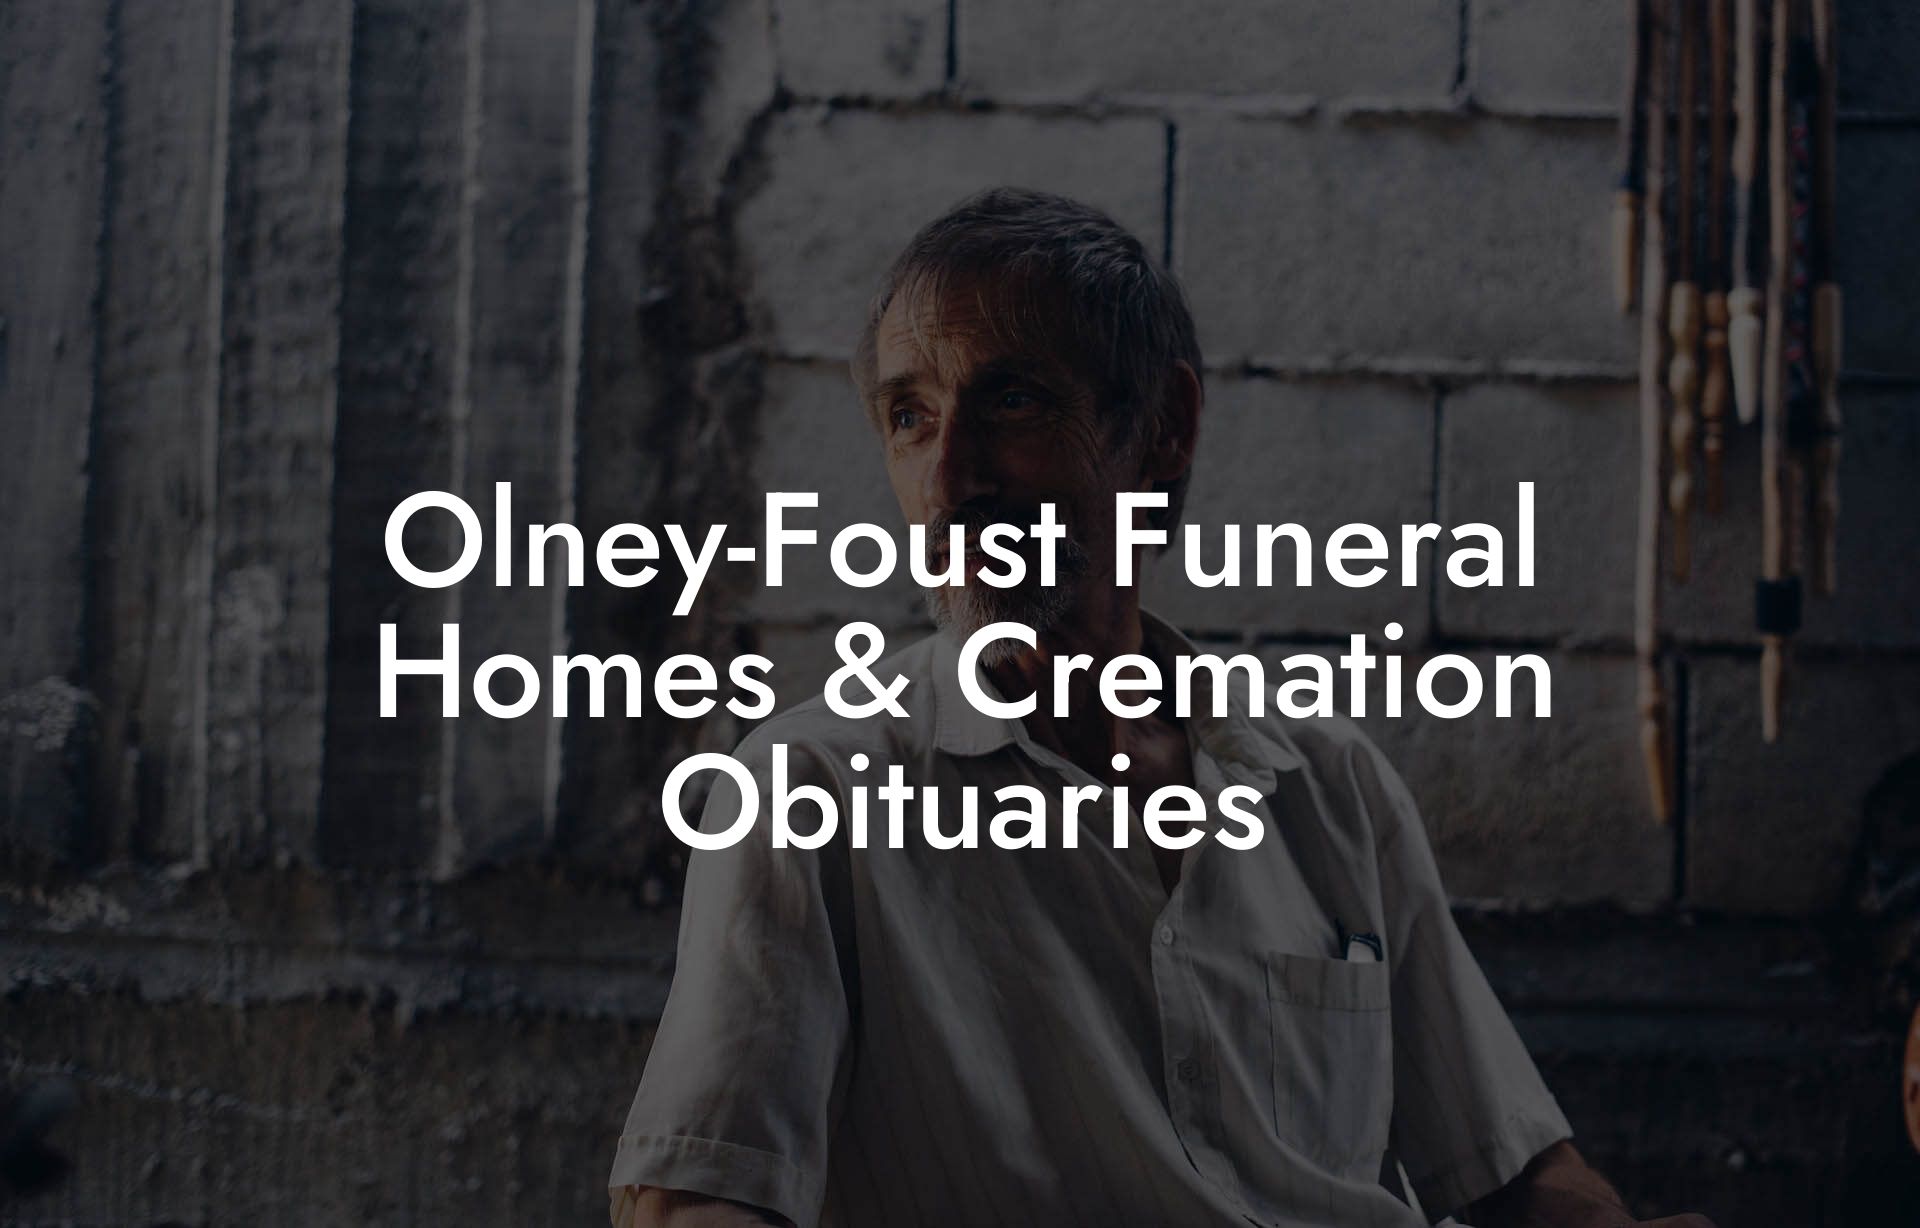 Olney-Foust Funeral Homes & Cremation Obituaries